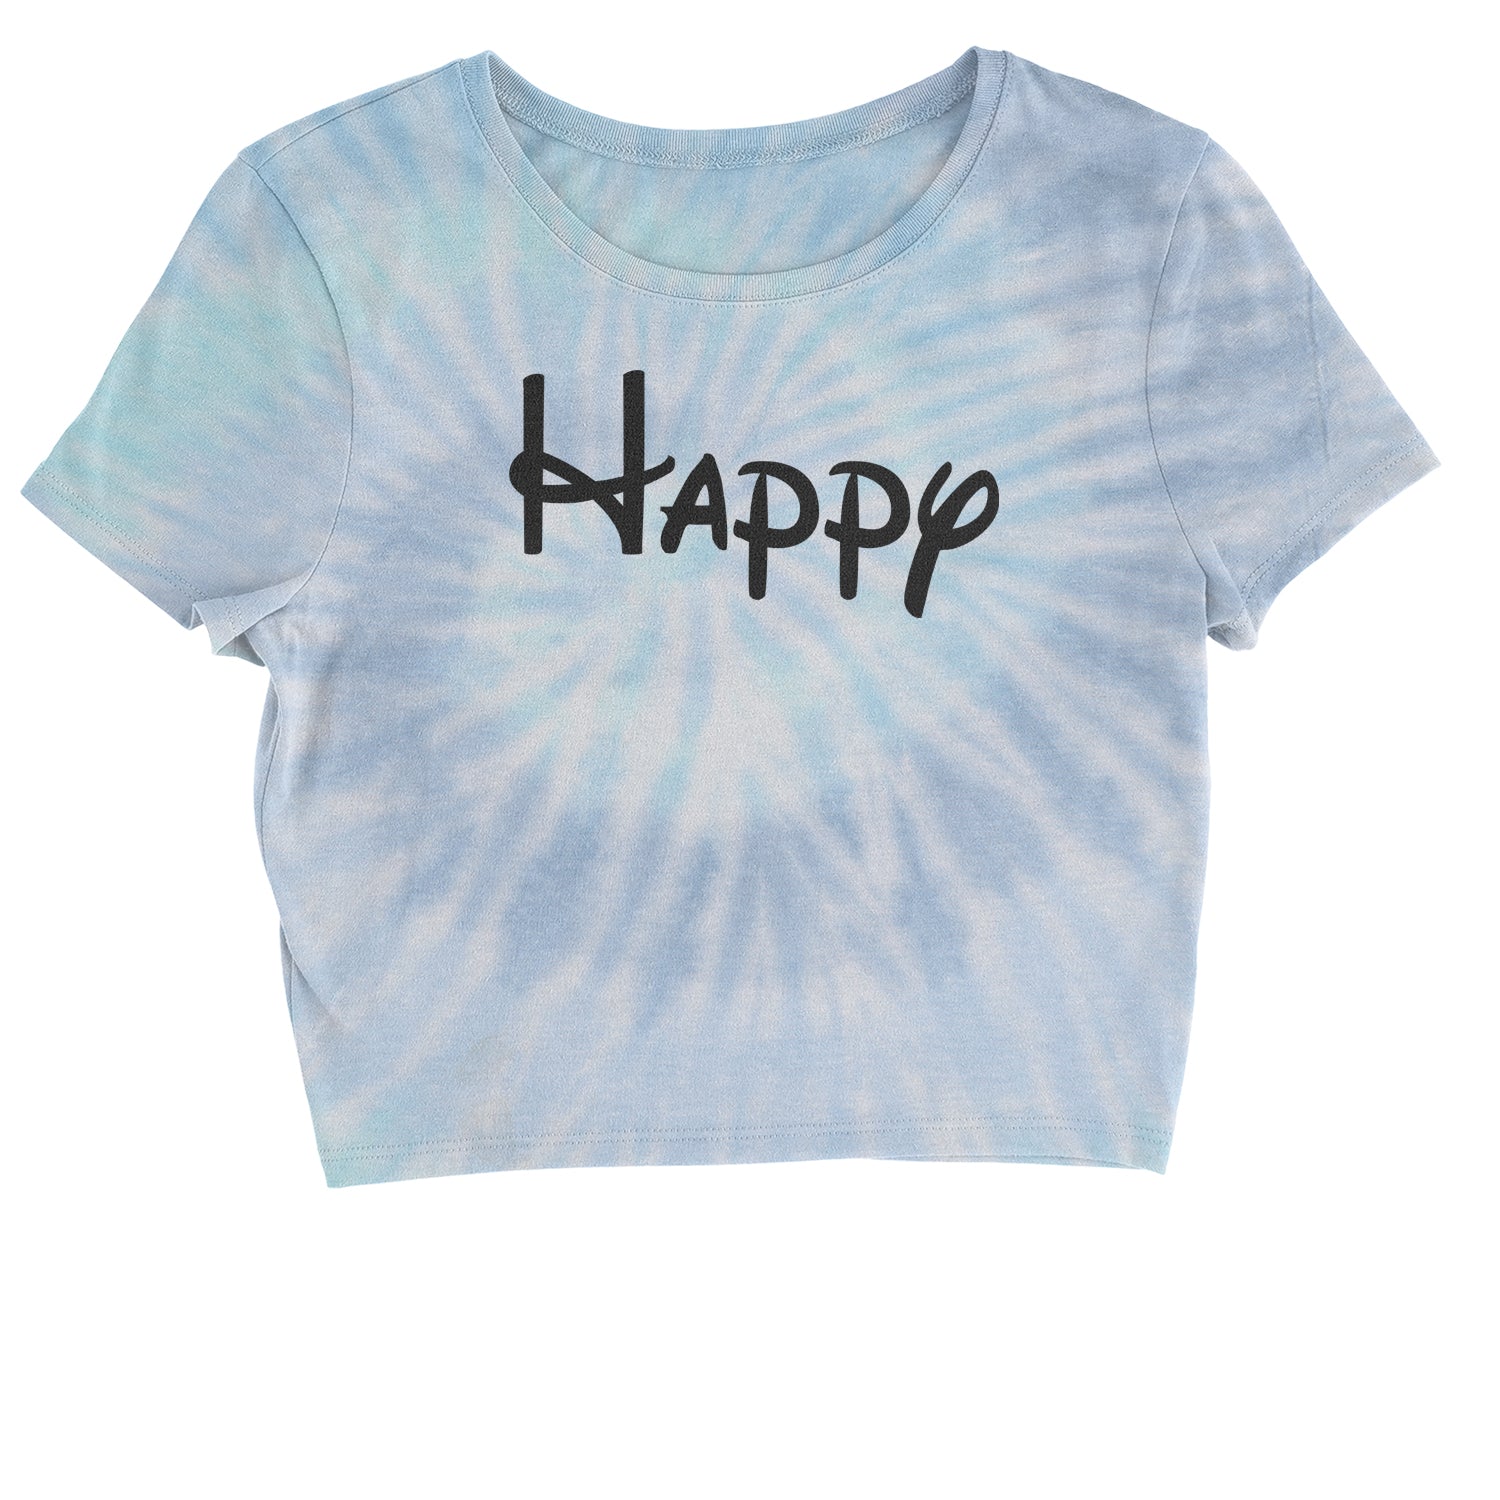 Happy - 7 Dwarfs Costume Cropped T-Shirt and, costume, dwarfs, group, halloween, matching, seven, snow, the, white by Expression Tees